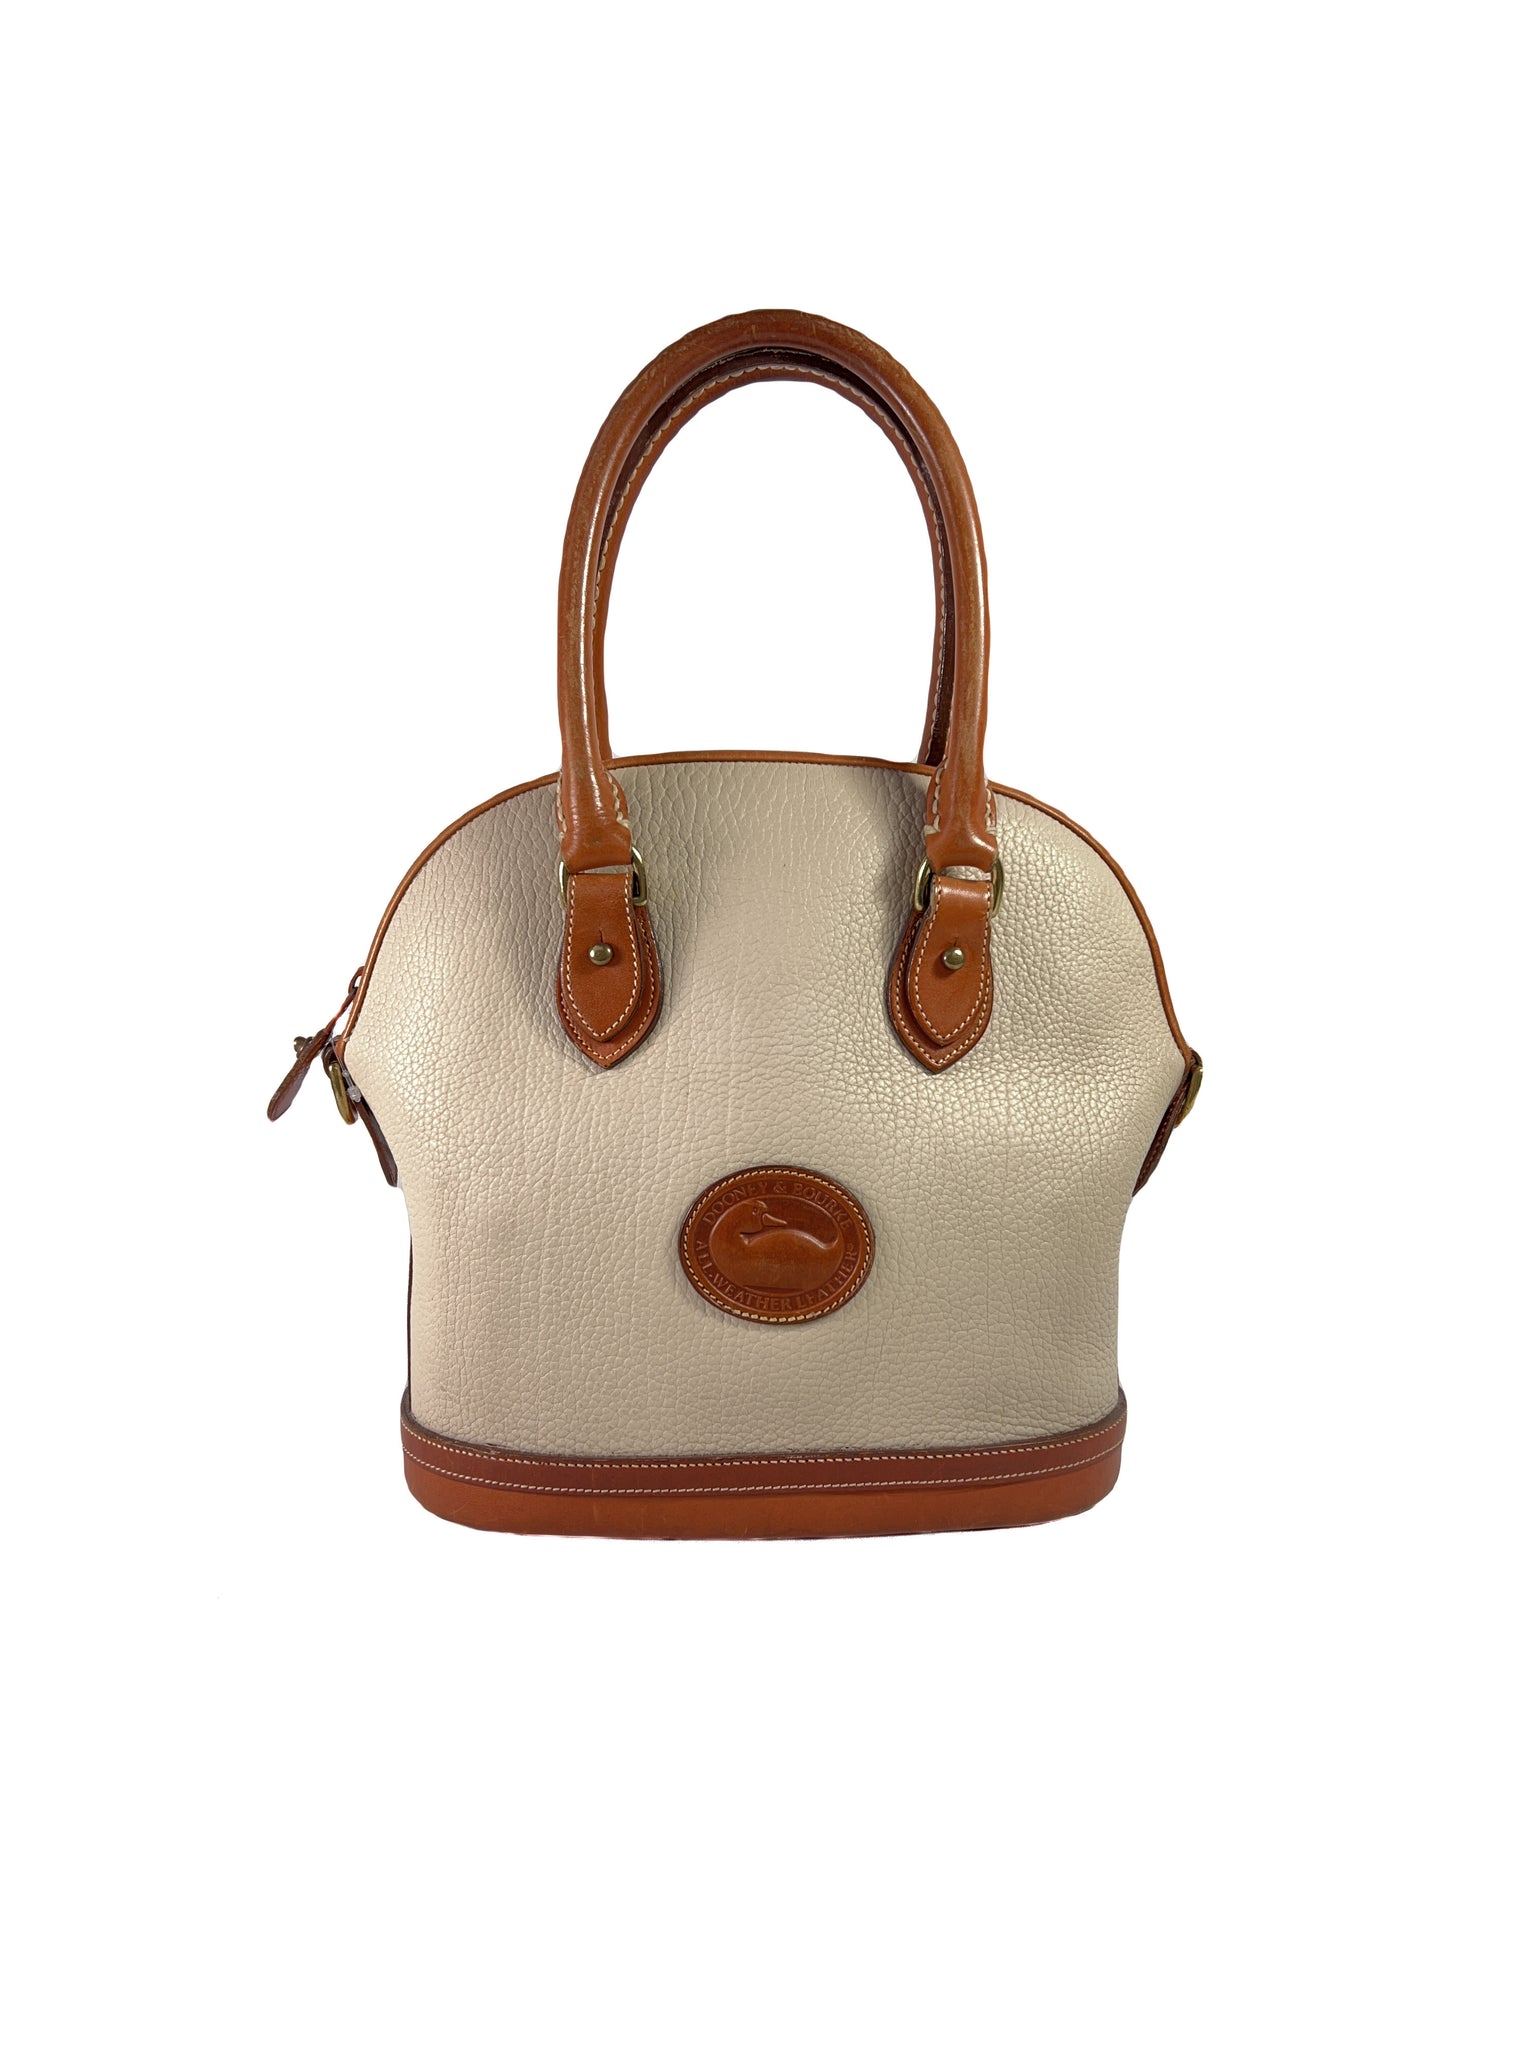 Vintage Leather Dooney and Bourke Pocketbook Purse Beige With 